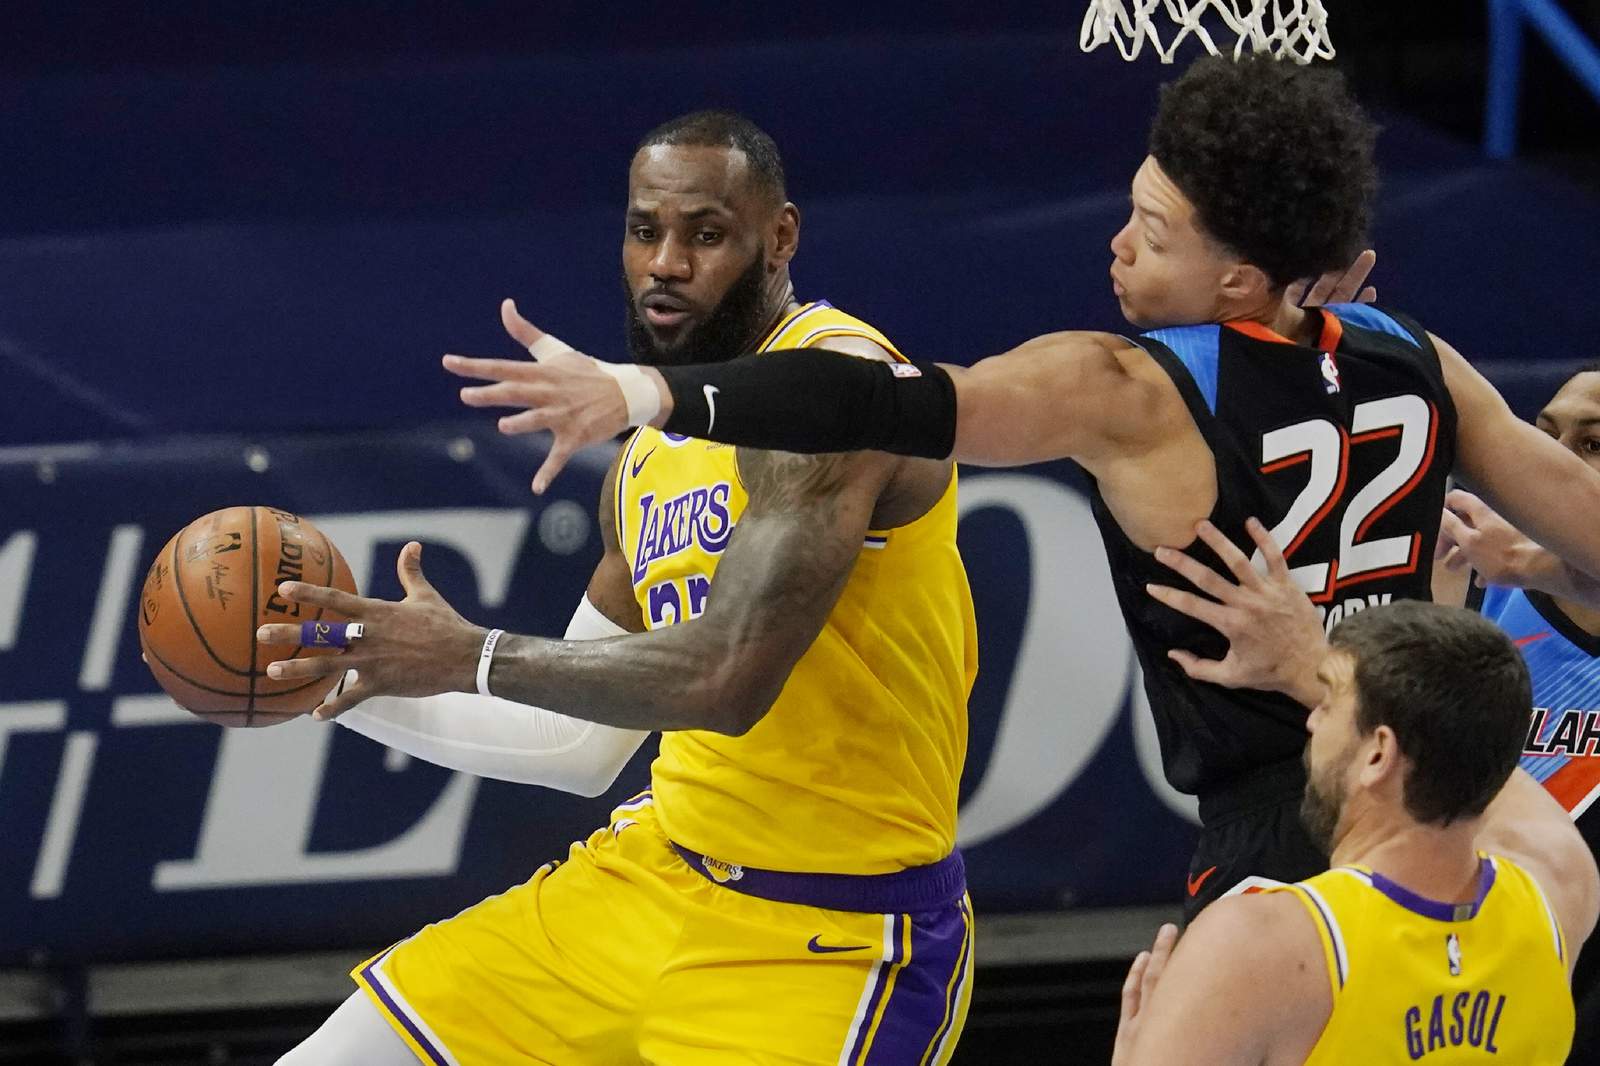 LeBron James scores 26 points, Lakers roll past Thunder